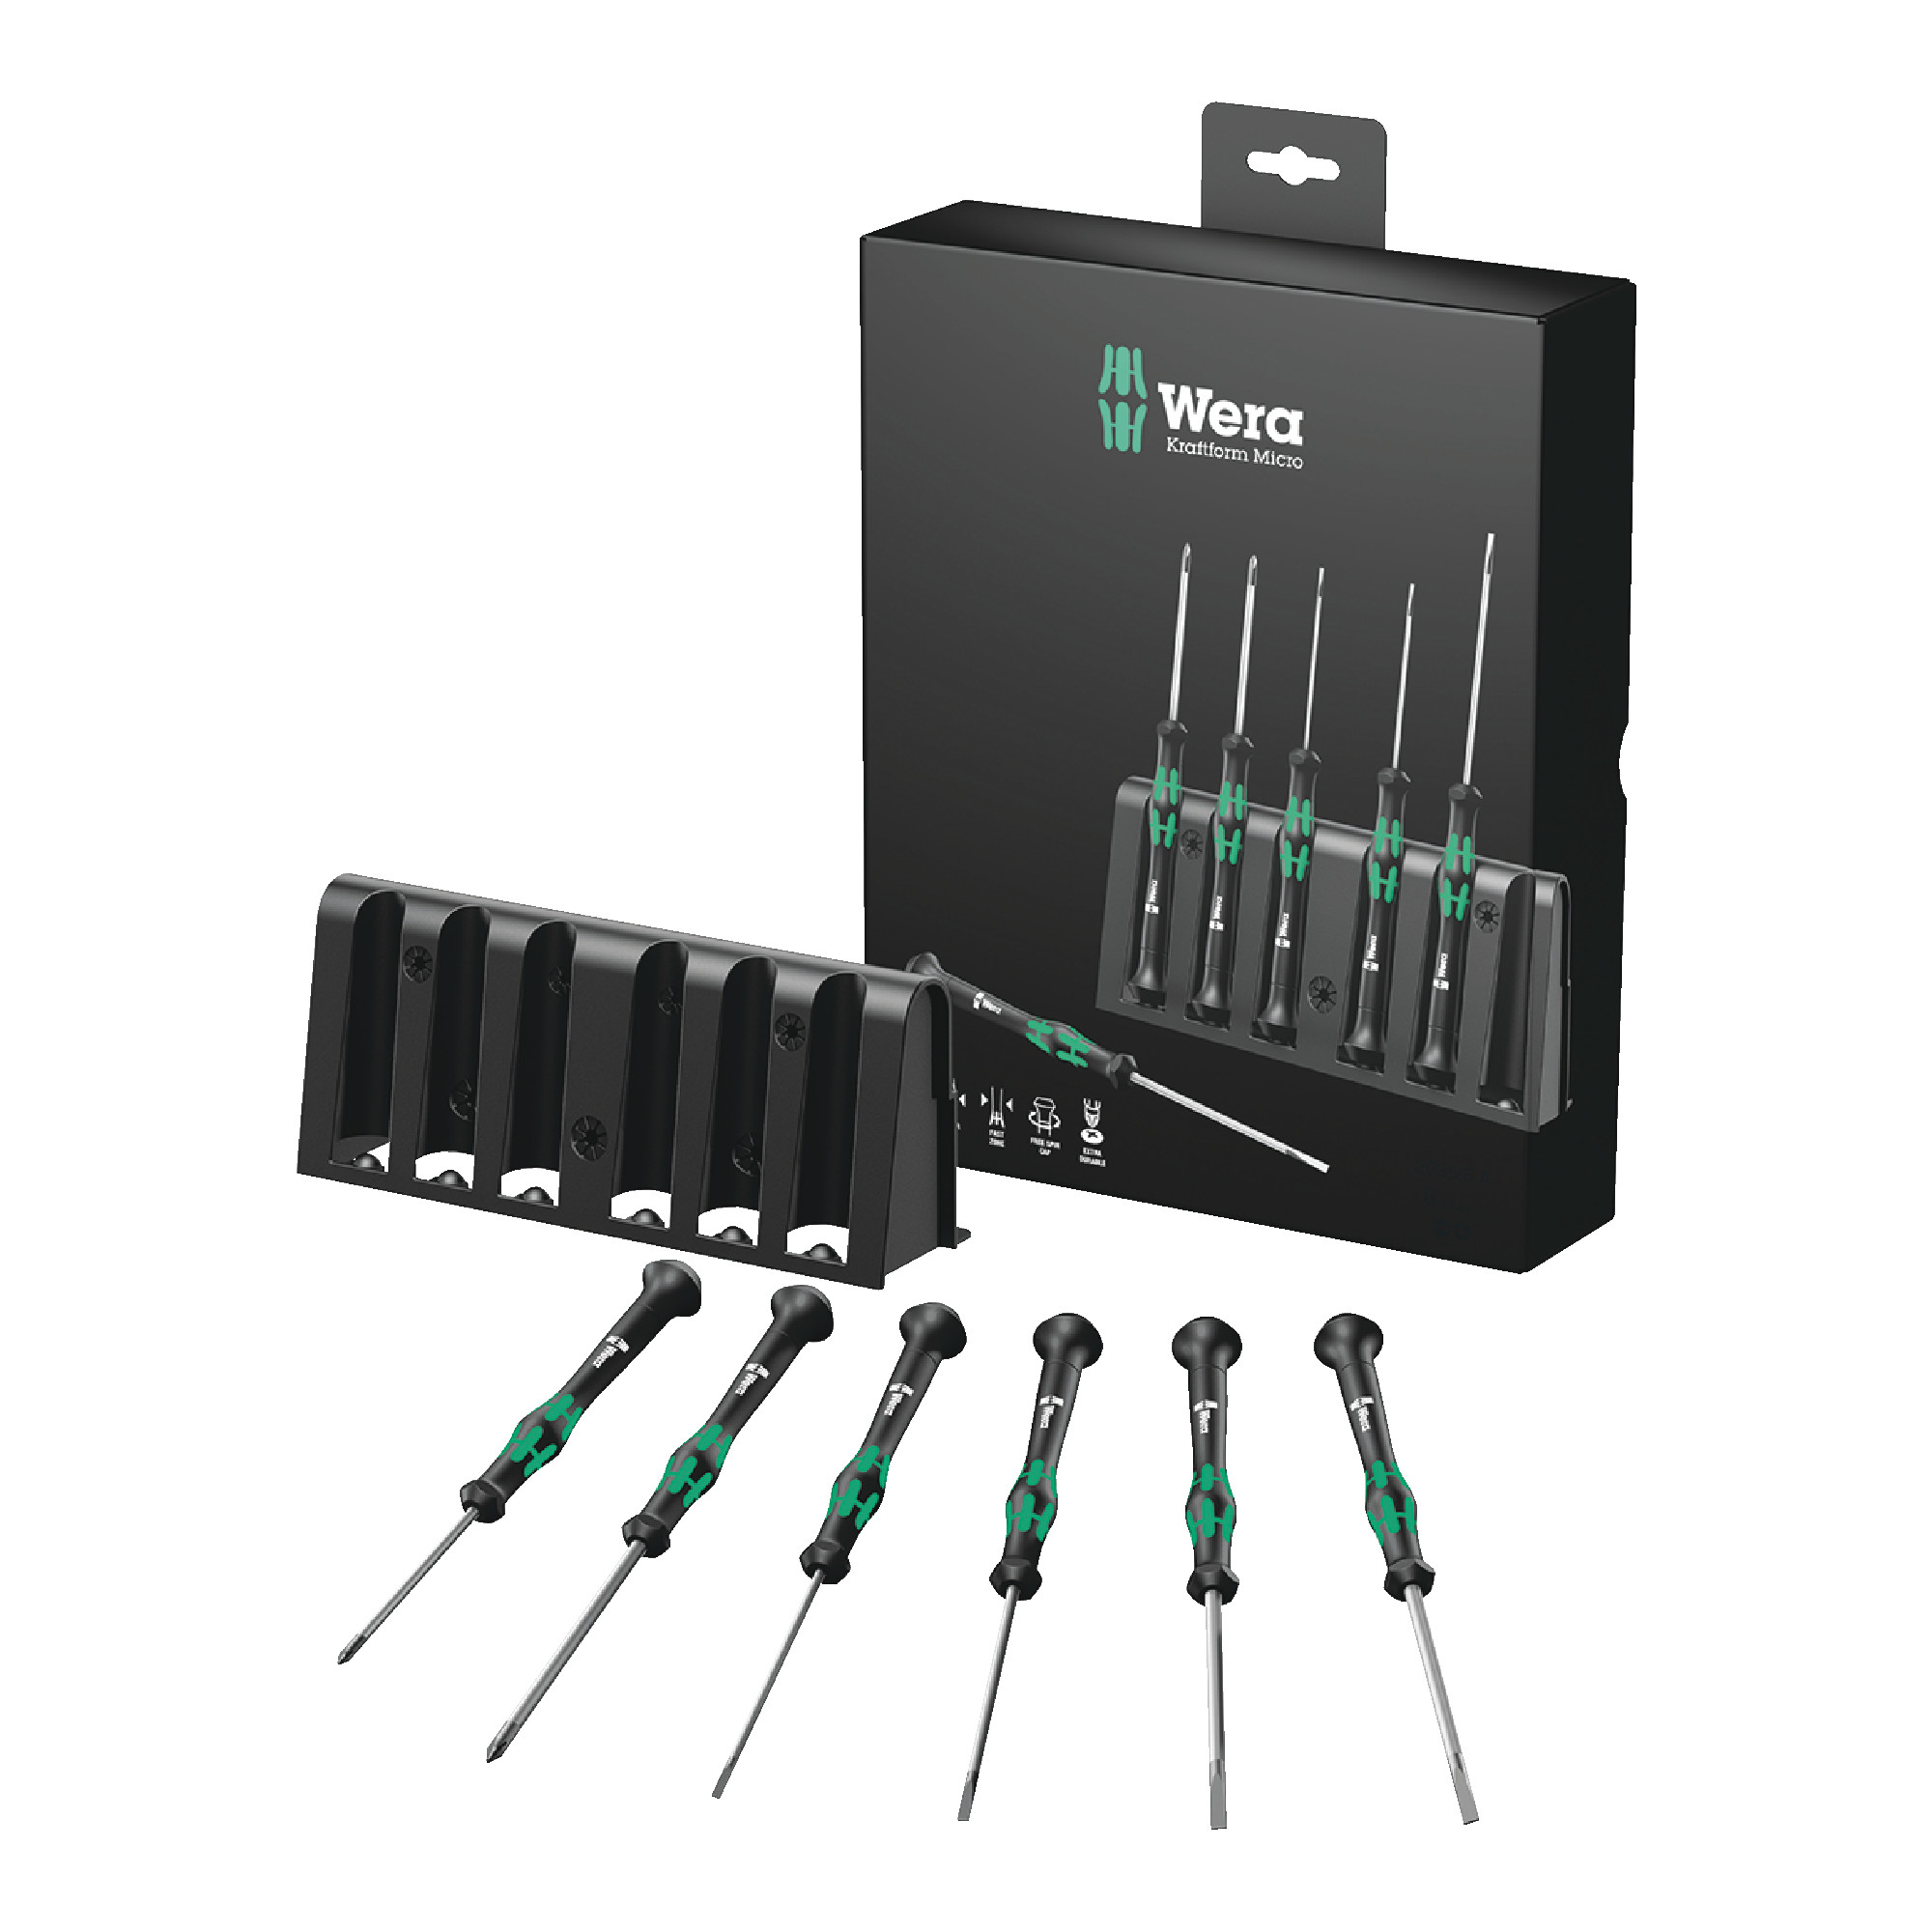 6 Piece Screwdriver Set & Rack For Electronic Applications